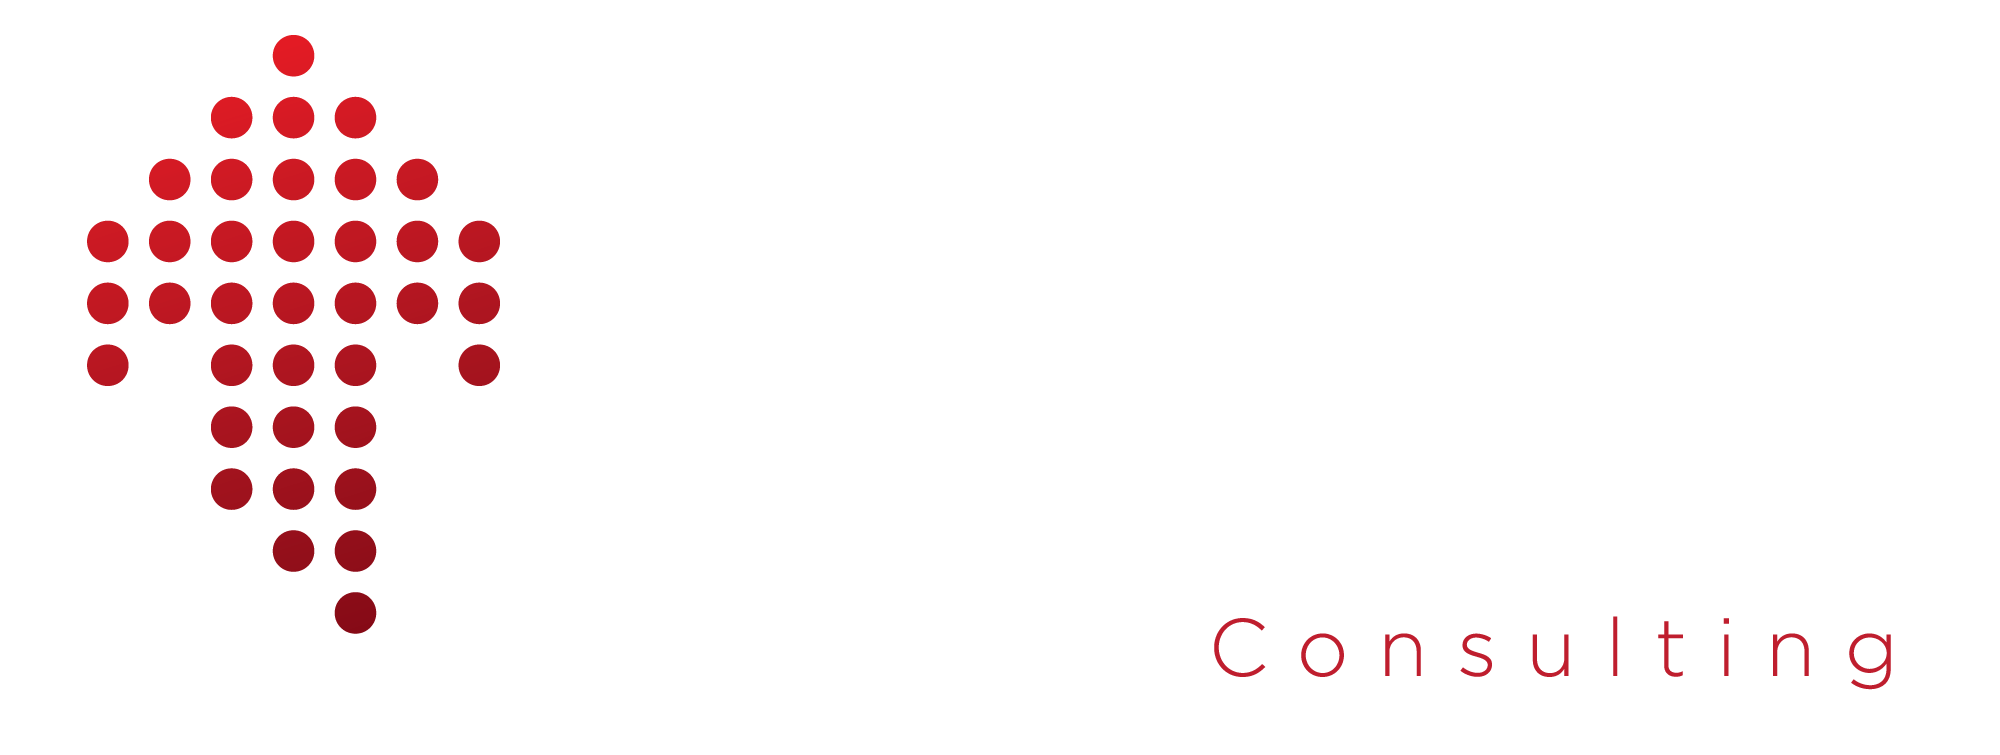 Upplause Consulting